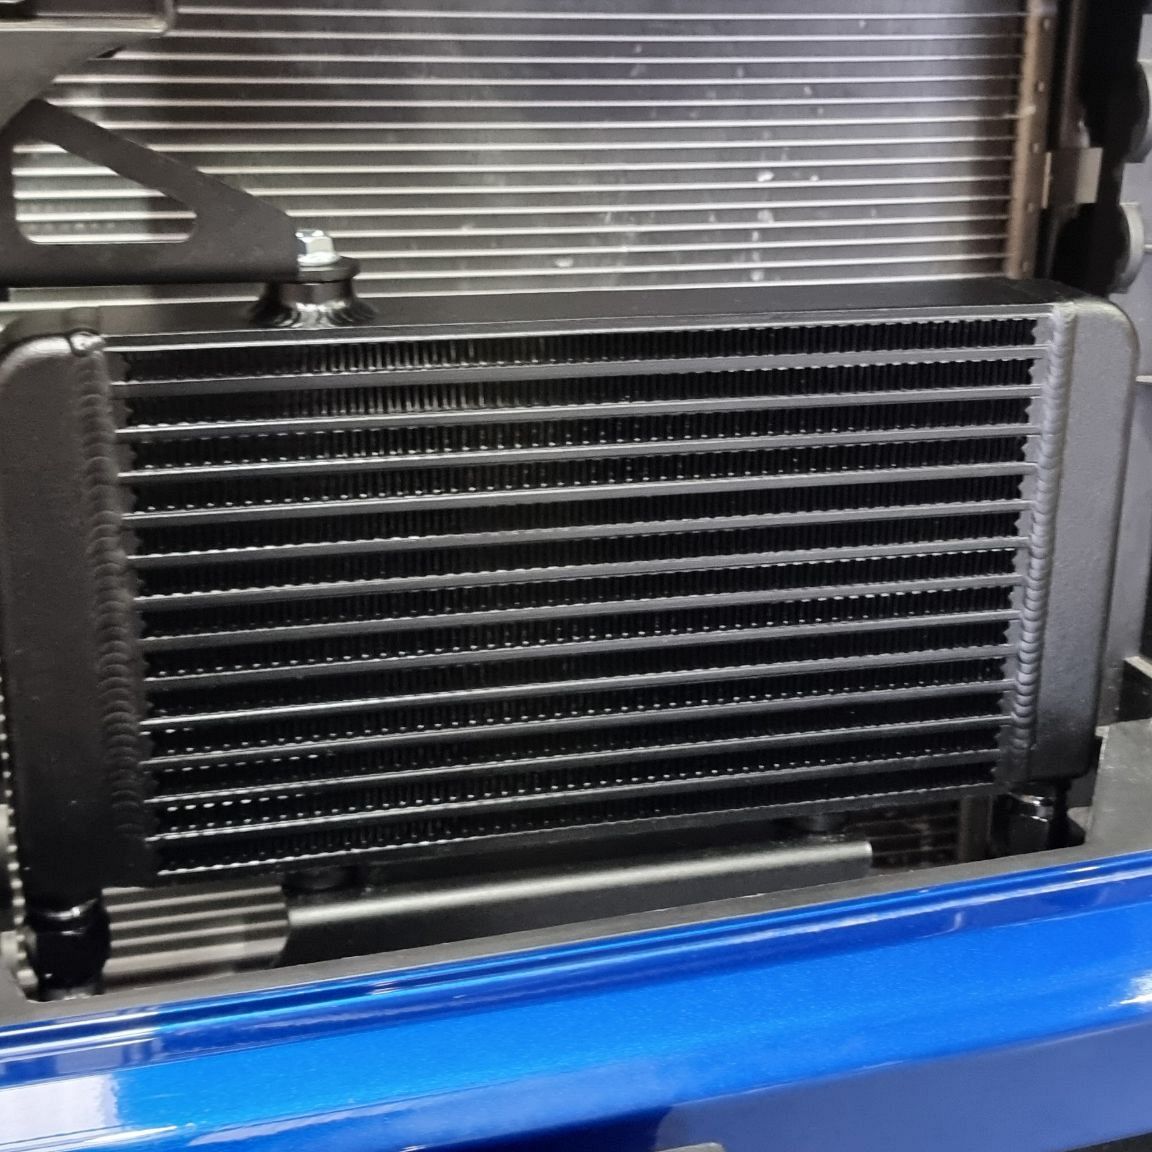 Next Gen Ranger Raptor Transmission Cooler - Black (Fits With Factory Type Intercoolers and Process West Stage 1 and 2 Intercooler)